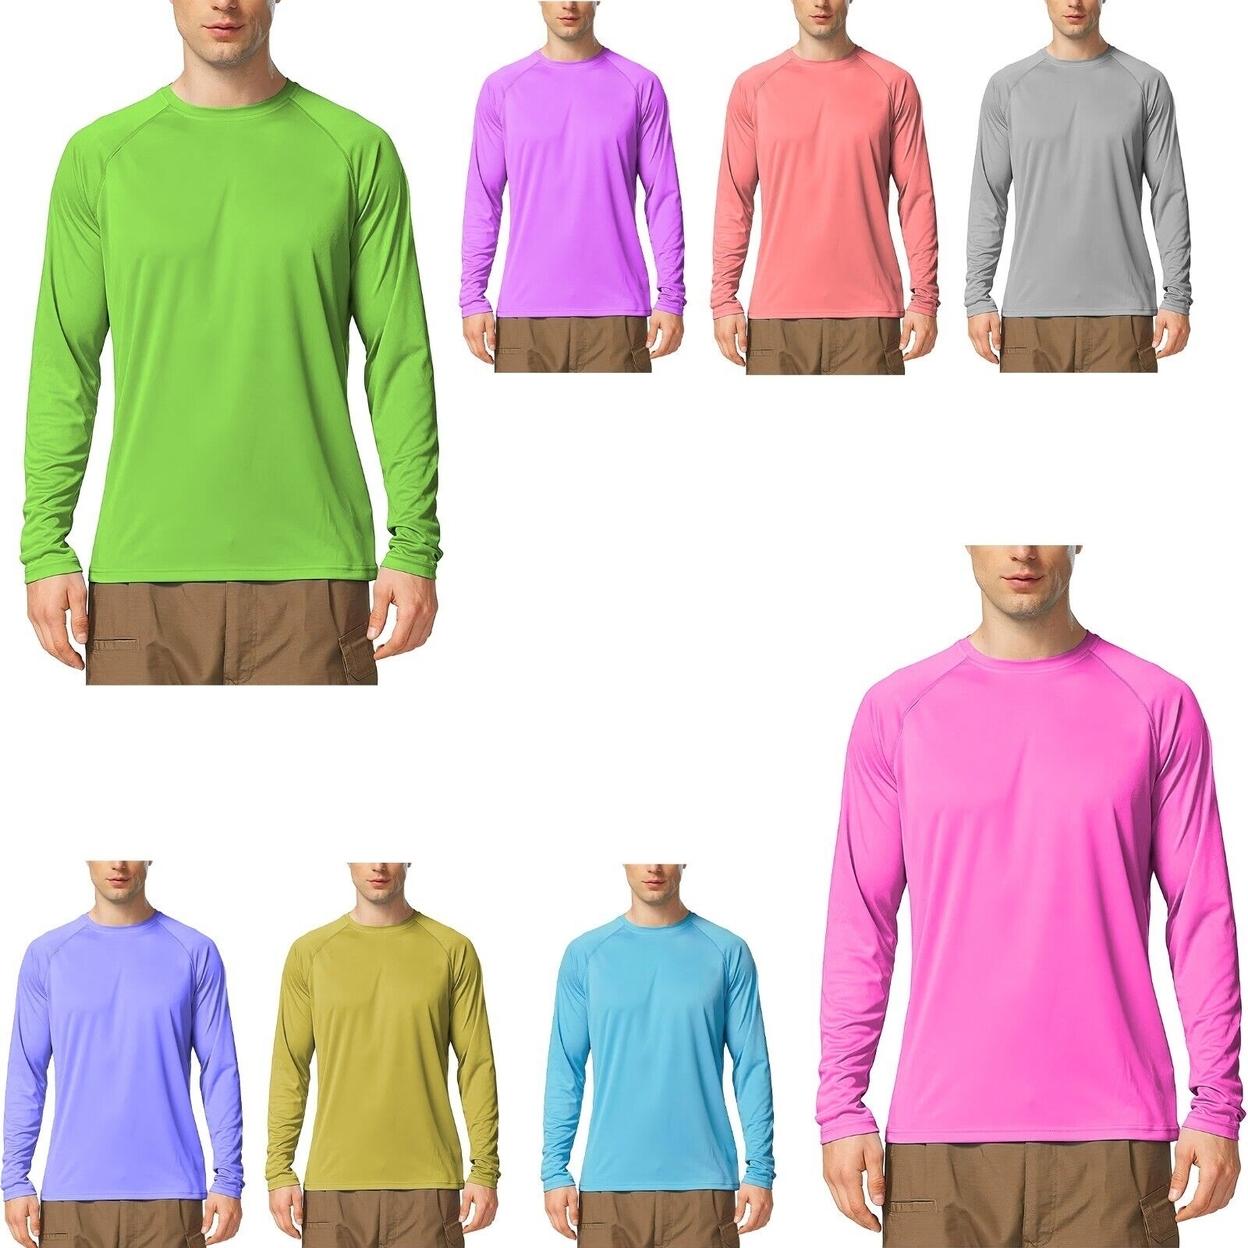 Multi-Pack: Men's Dri-Fit Moisture Wicking Athletic Cool Performance Slim Fit Long Sleeve T-Shirts - 3-pack, X-large